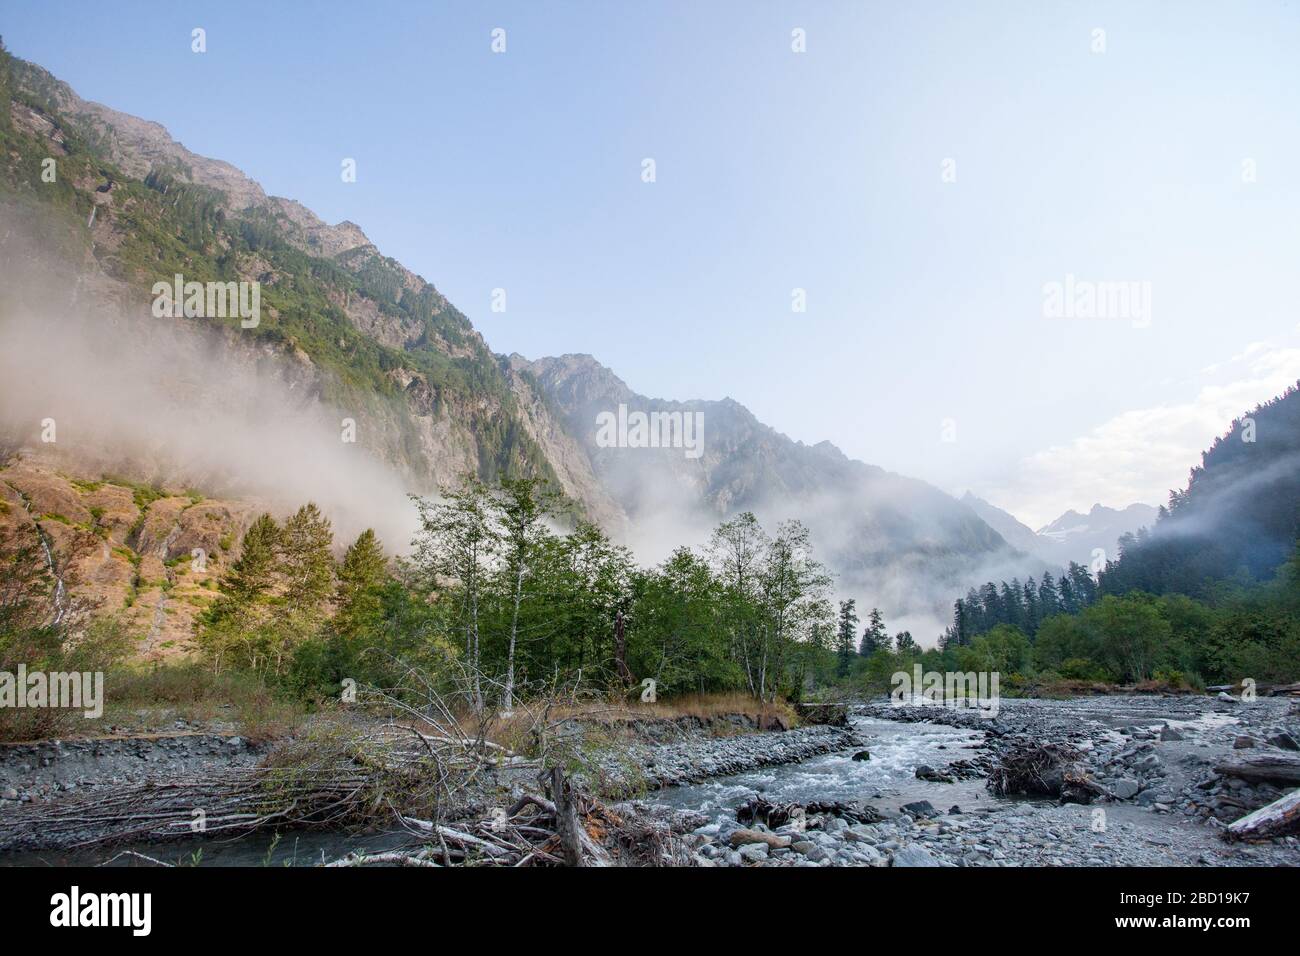 A stream runs through a mountain valley, with low-lying fog and sunlit mountainsides. Stock Photo